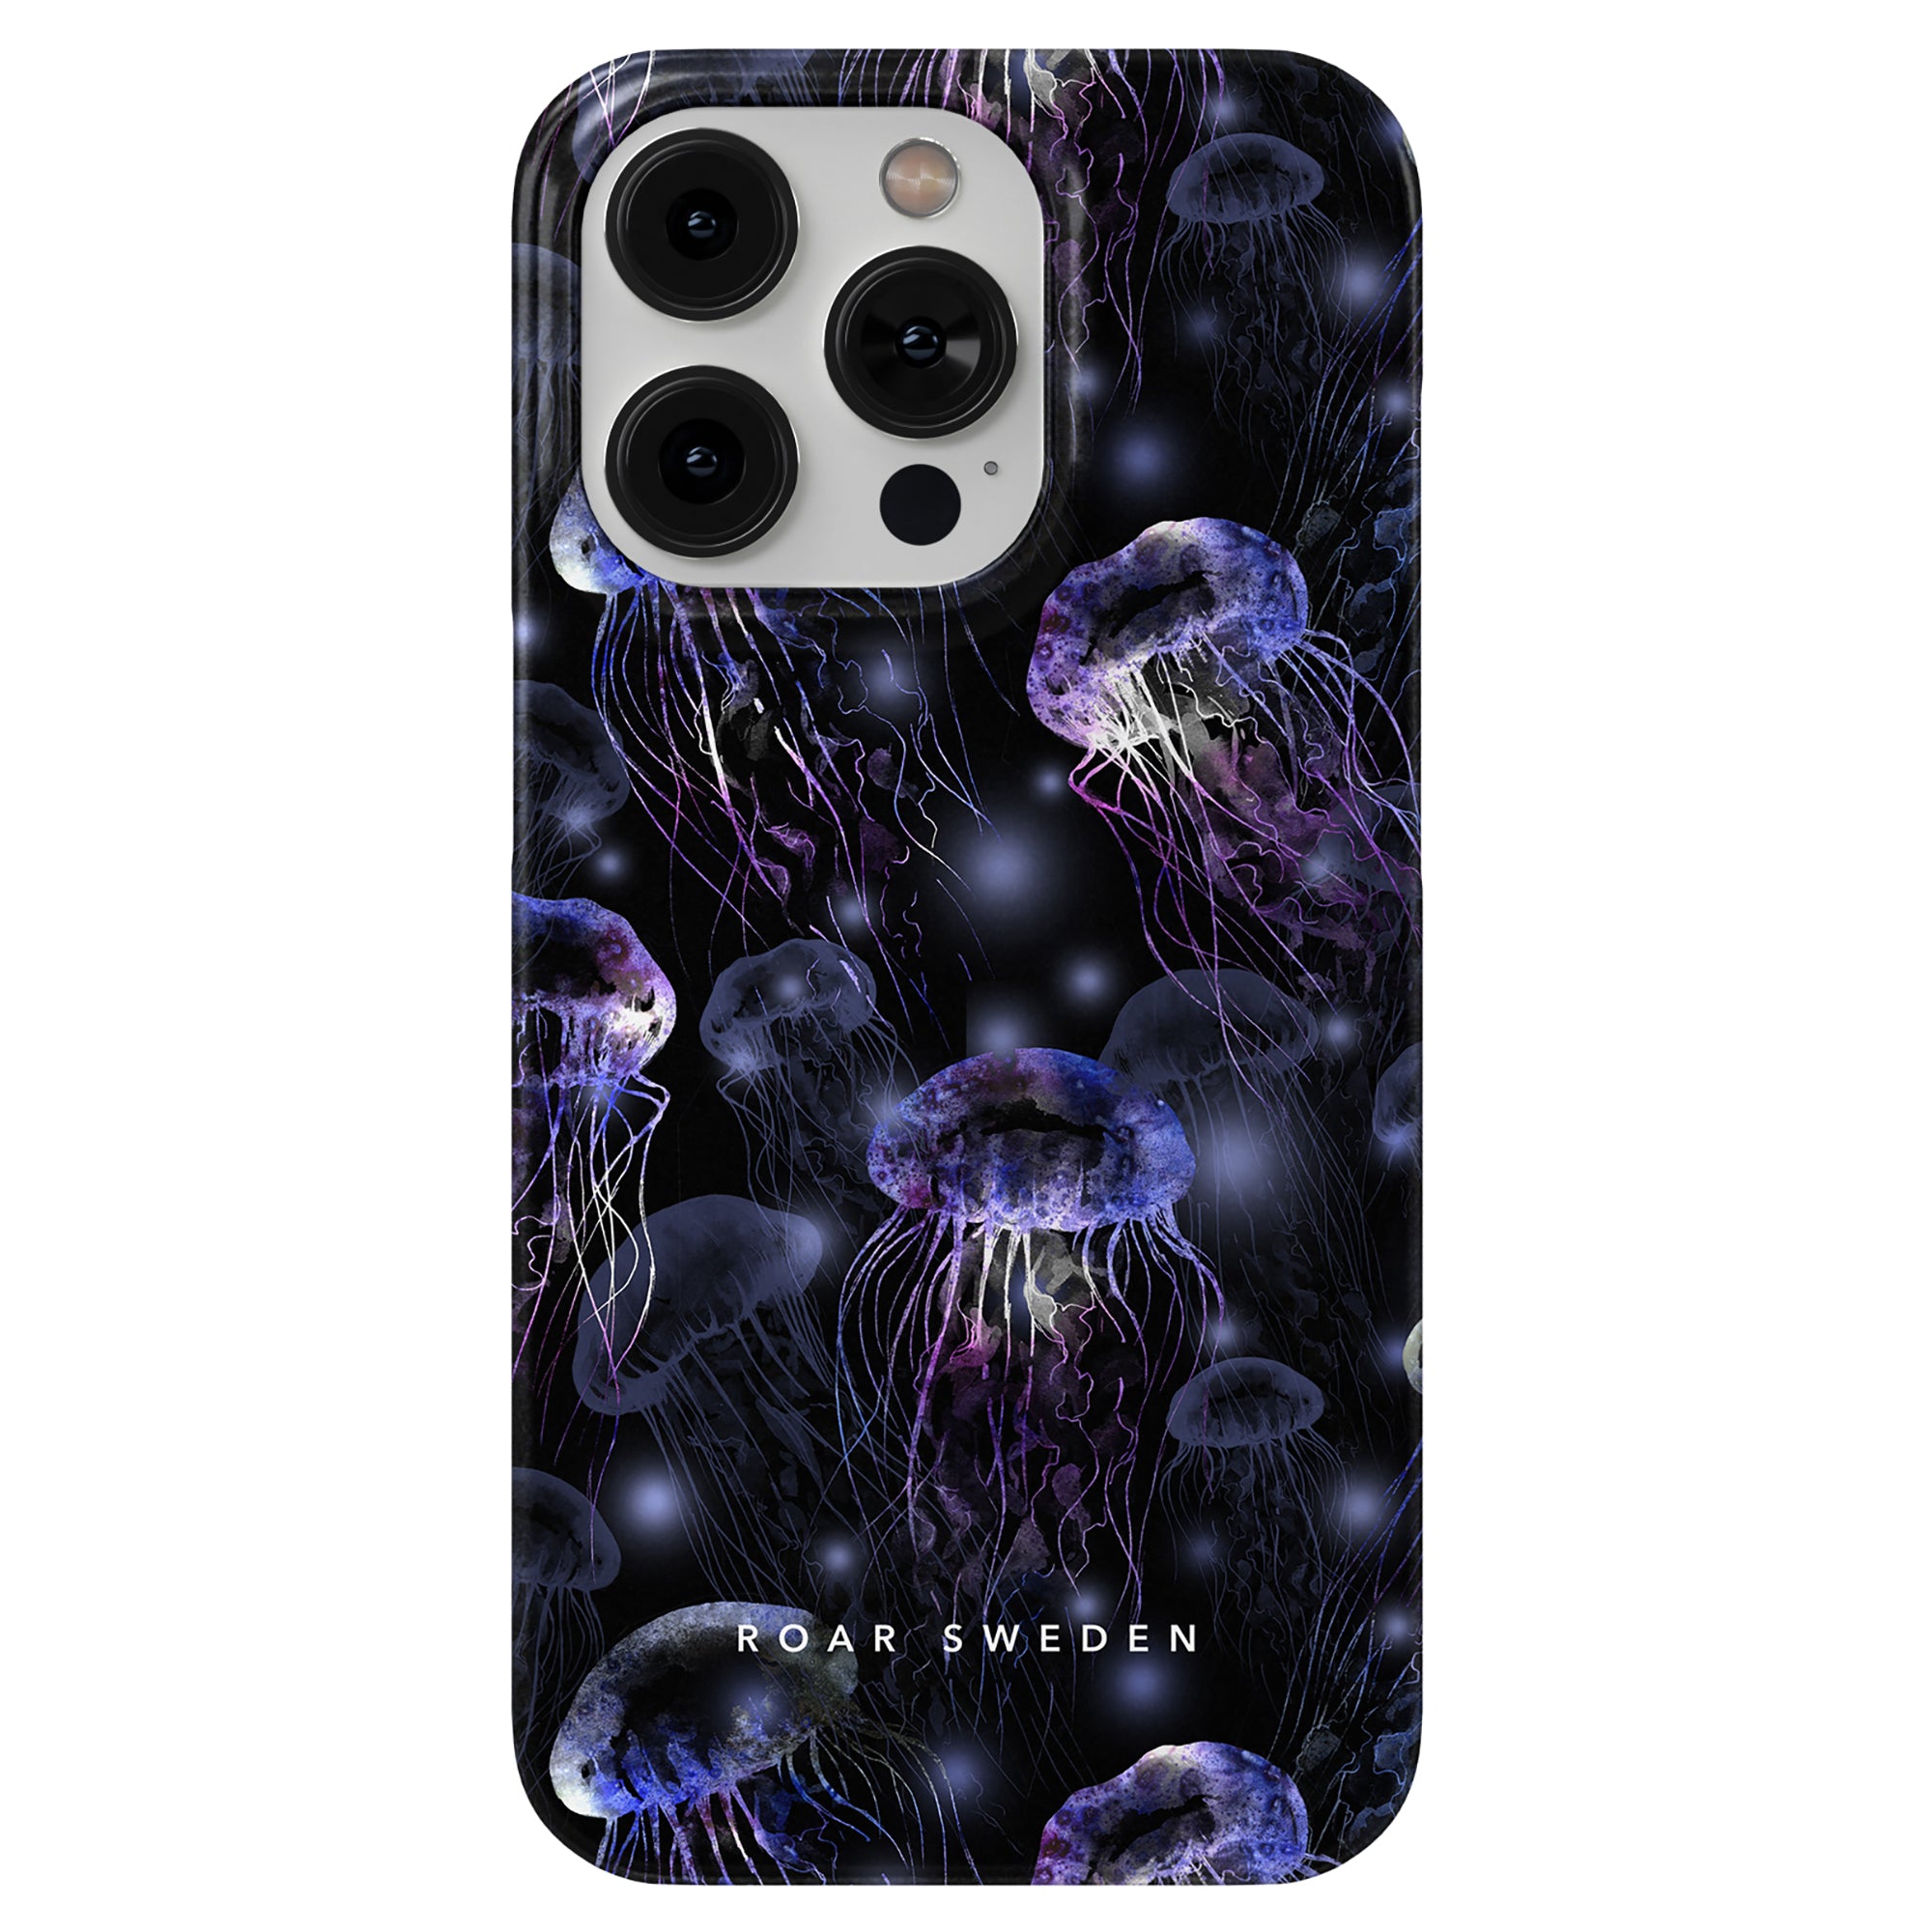 Smack - Slim case iphone 11 pro case with a whimsical design inspired by the mesmerizing beauty of these graceful creatures. The case is made from high-quality materials to provide optimal protection for your iPhone.